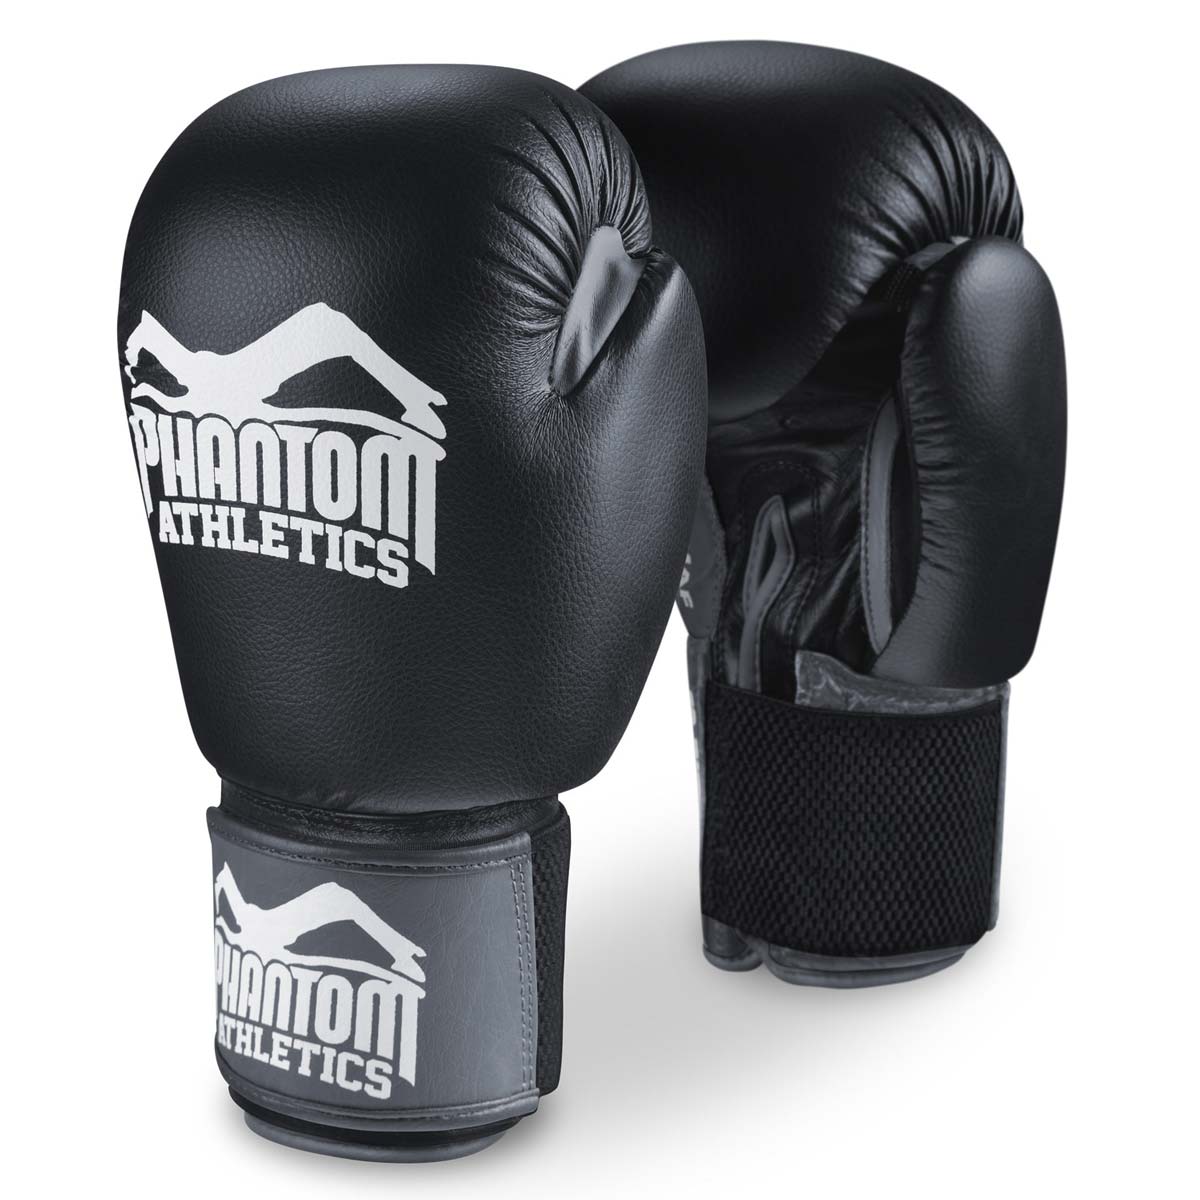 The Phantom Ultra boxing gloves for training, sparring and competition.